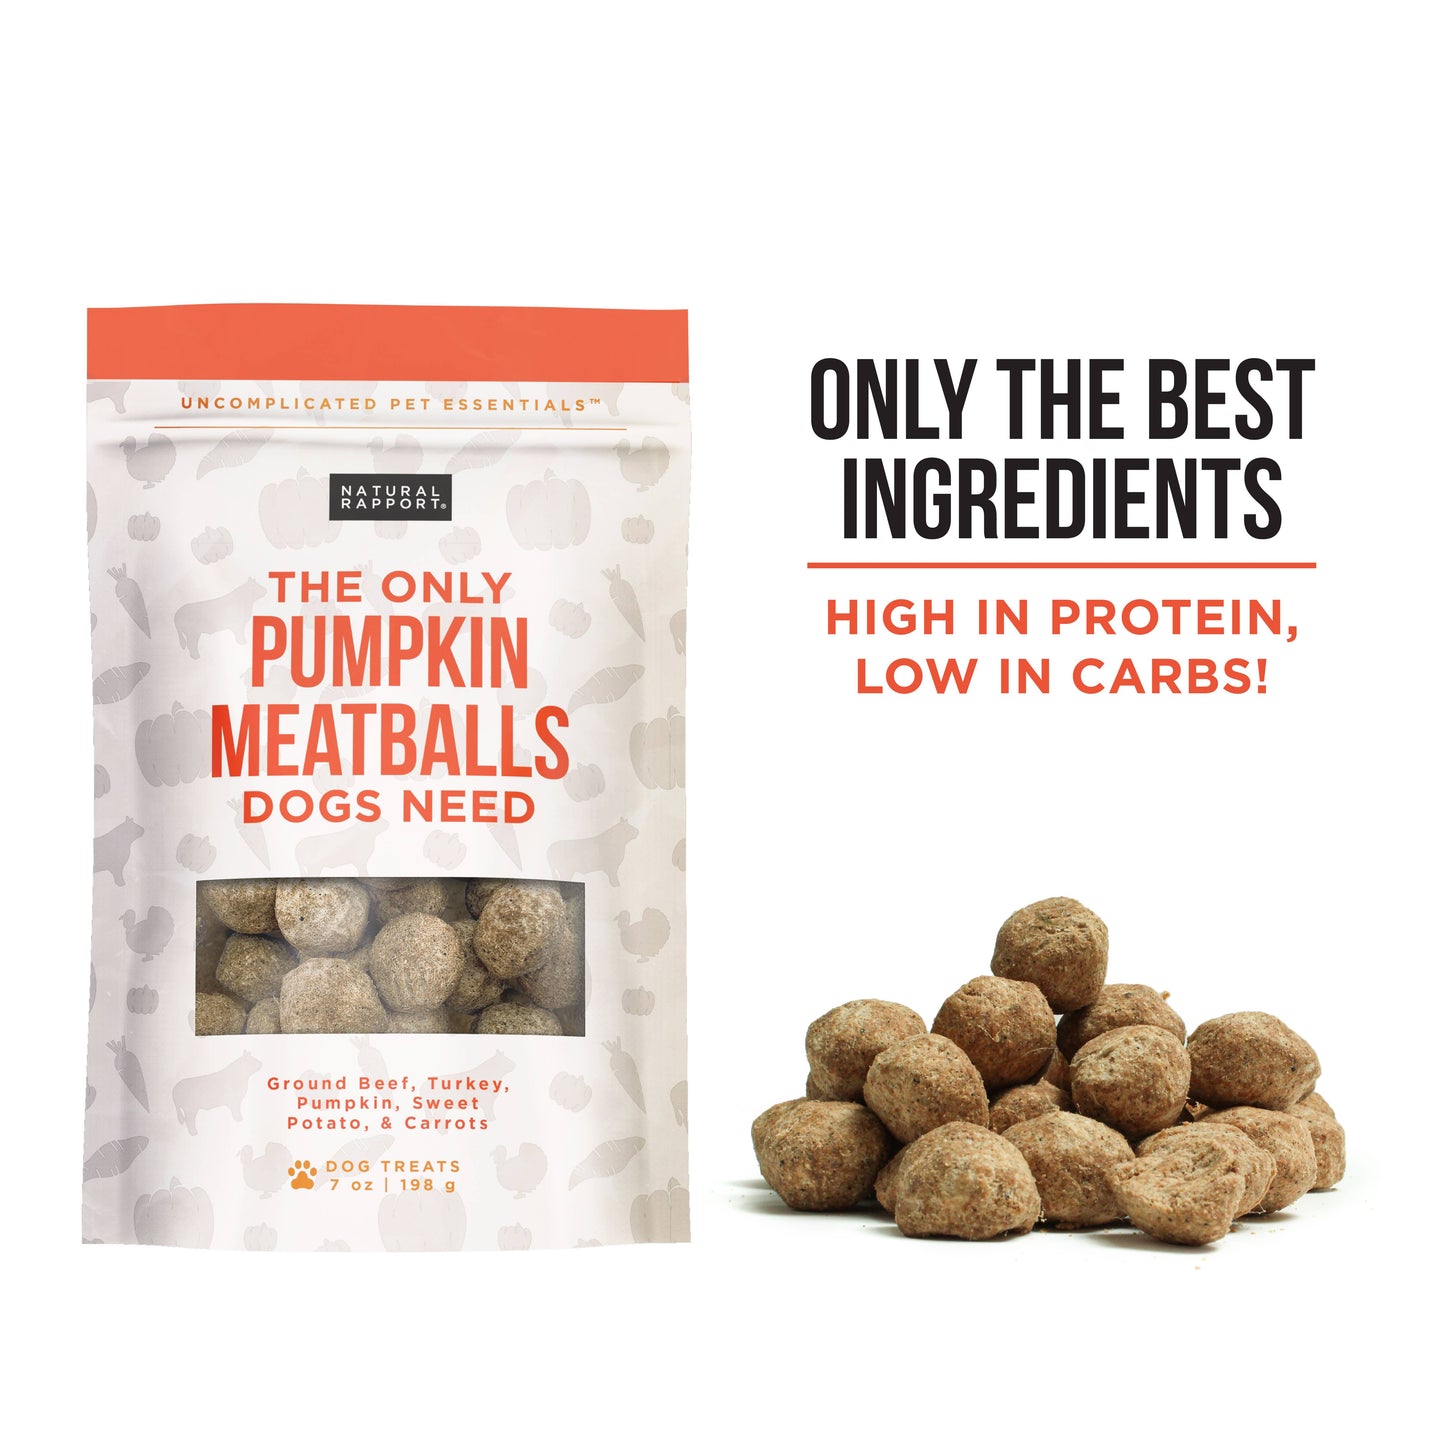 The Only Pumpkin Meatballs Dogs Need: 7 oz bag